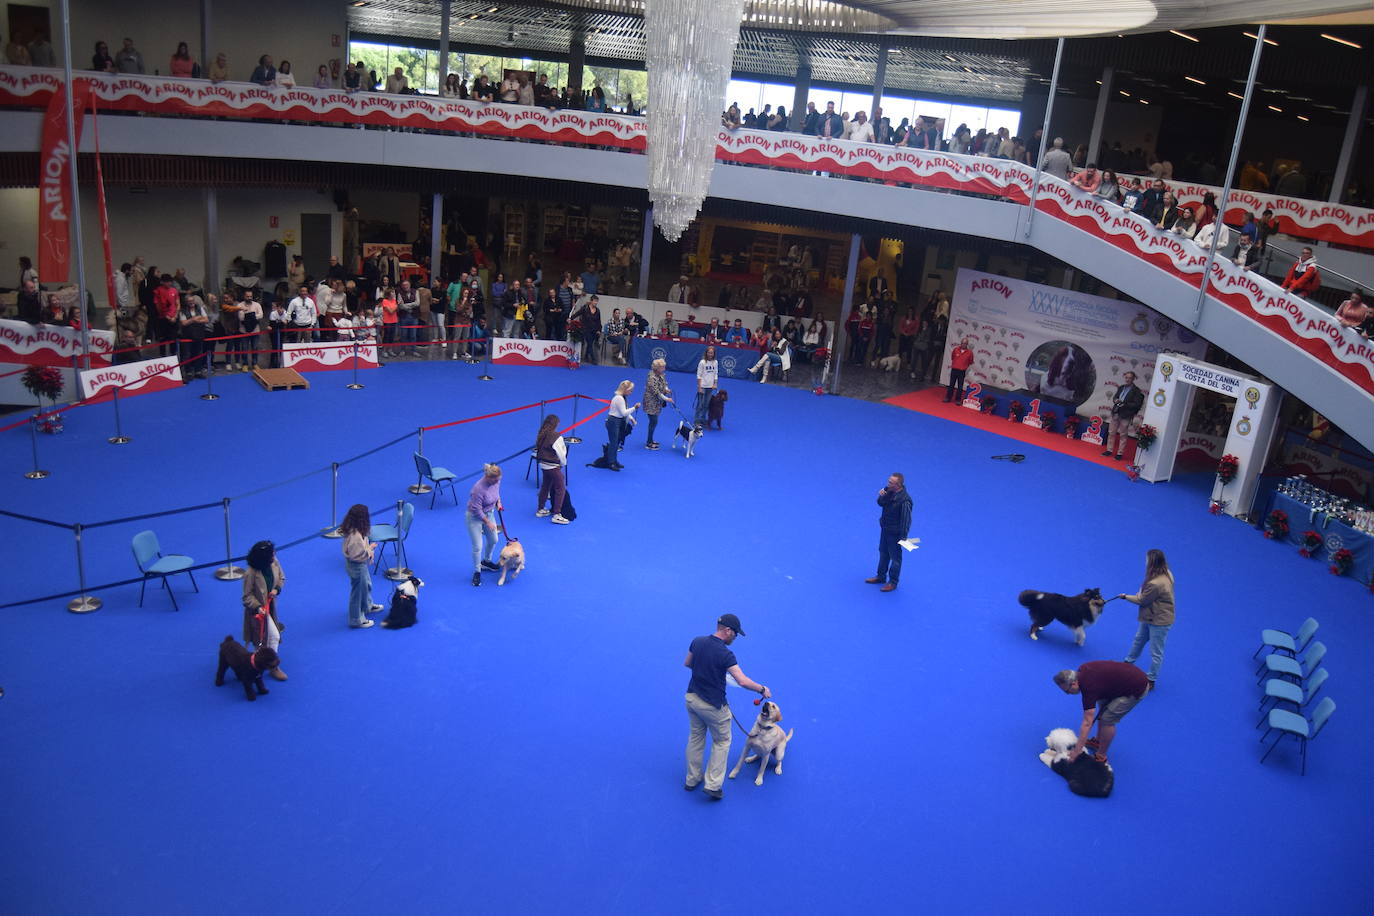 Expocan is one of the longest-running dog shows Andalucía and is organised by the Canine Society of the Costa del Sol